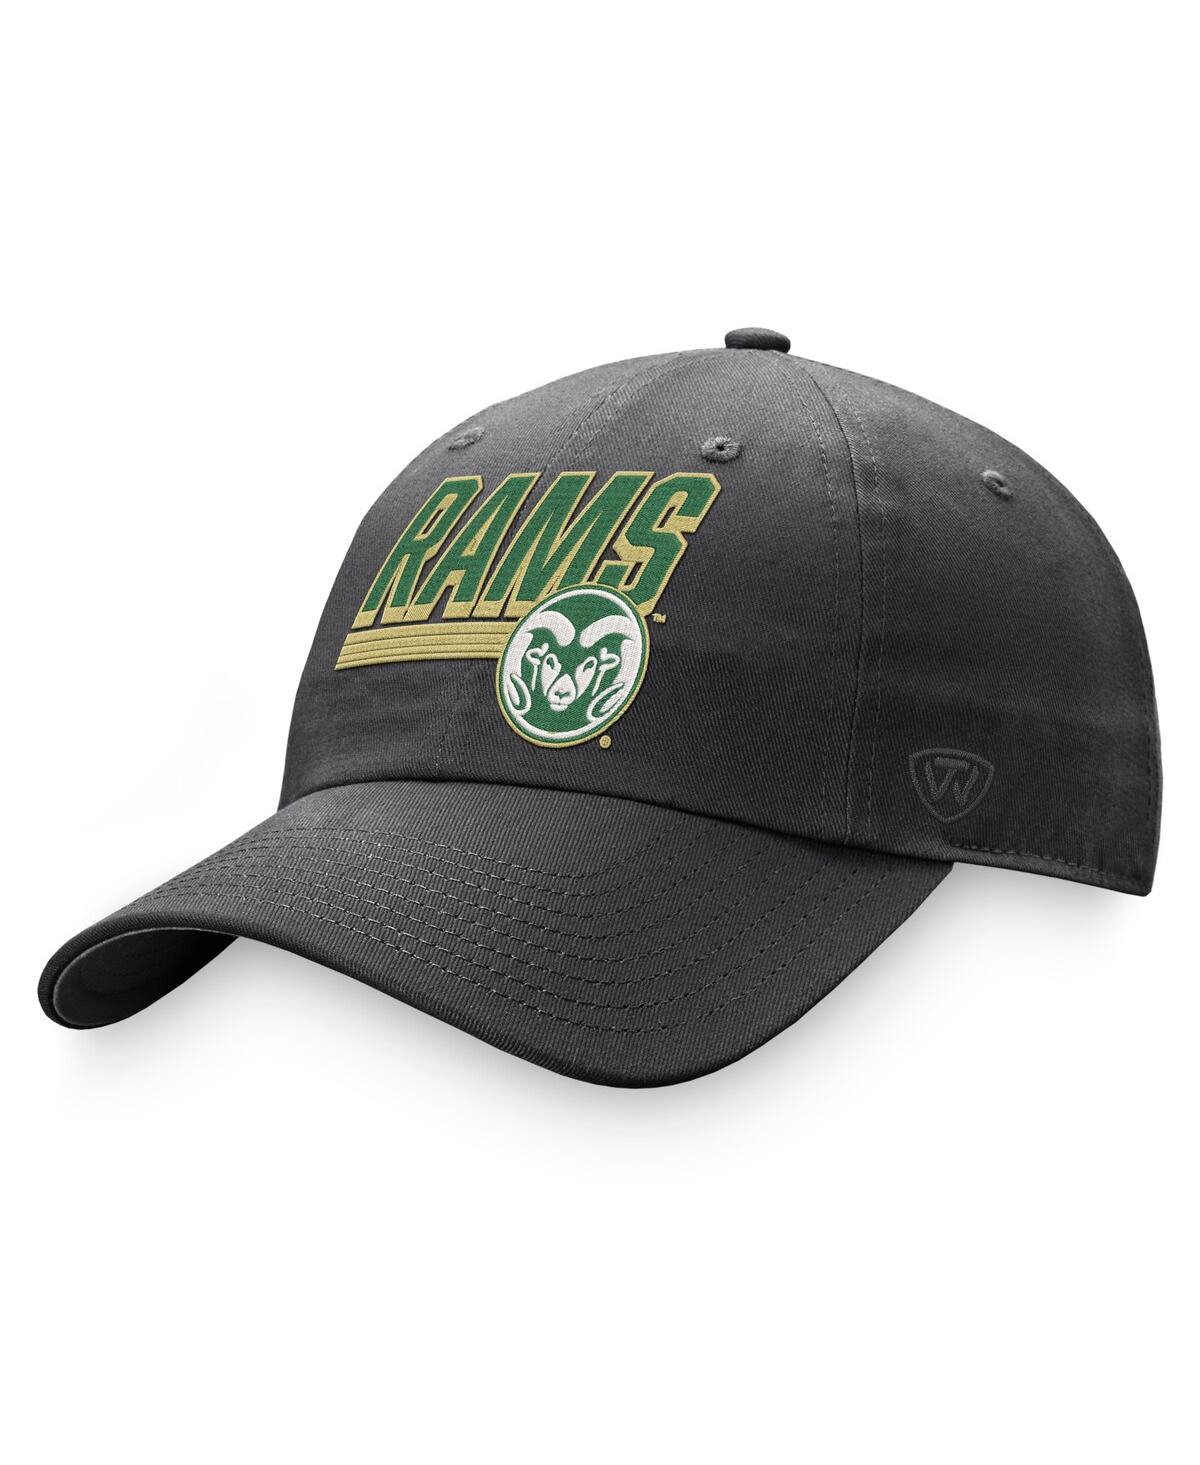 Men's Top of the World Charcoal Colorado State Rams Slice Adjustable Hat - Charcoal